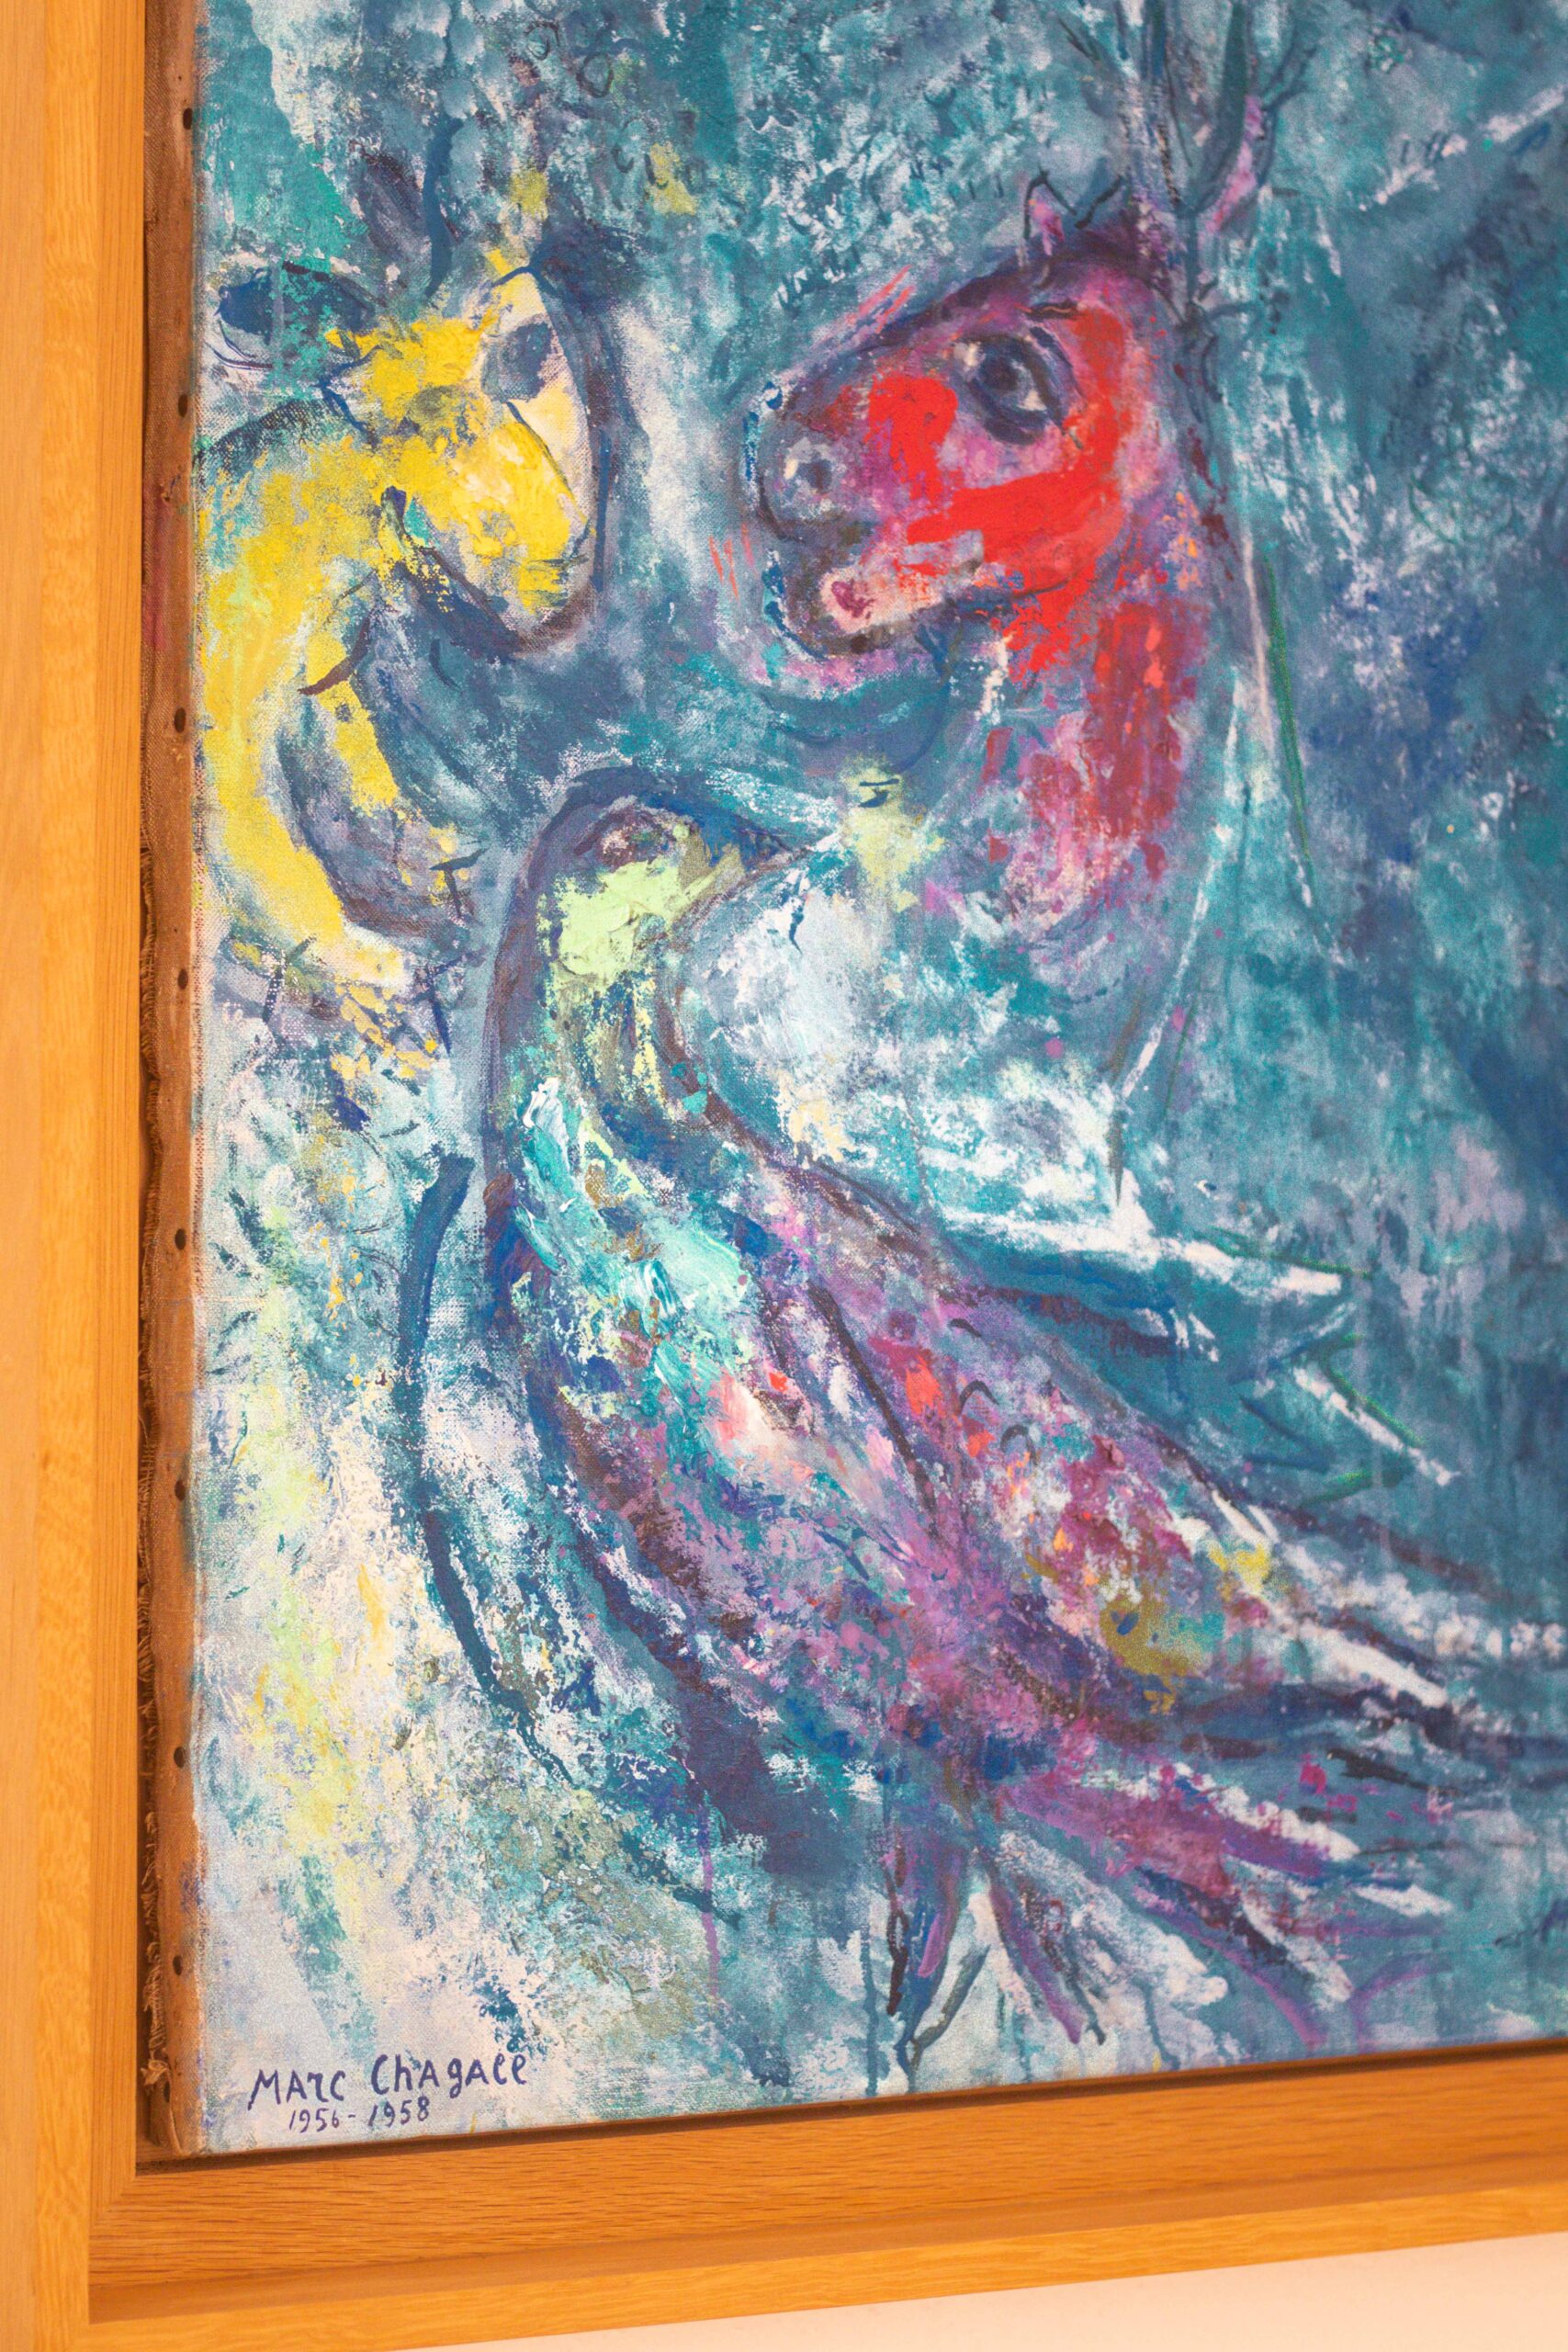 Detail and signature of the painting 'La Création de l'homme" in the Marc Chagall National Museum (Musée National Marc Chagall) in Nice, France